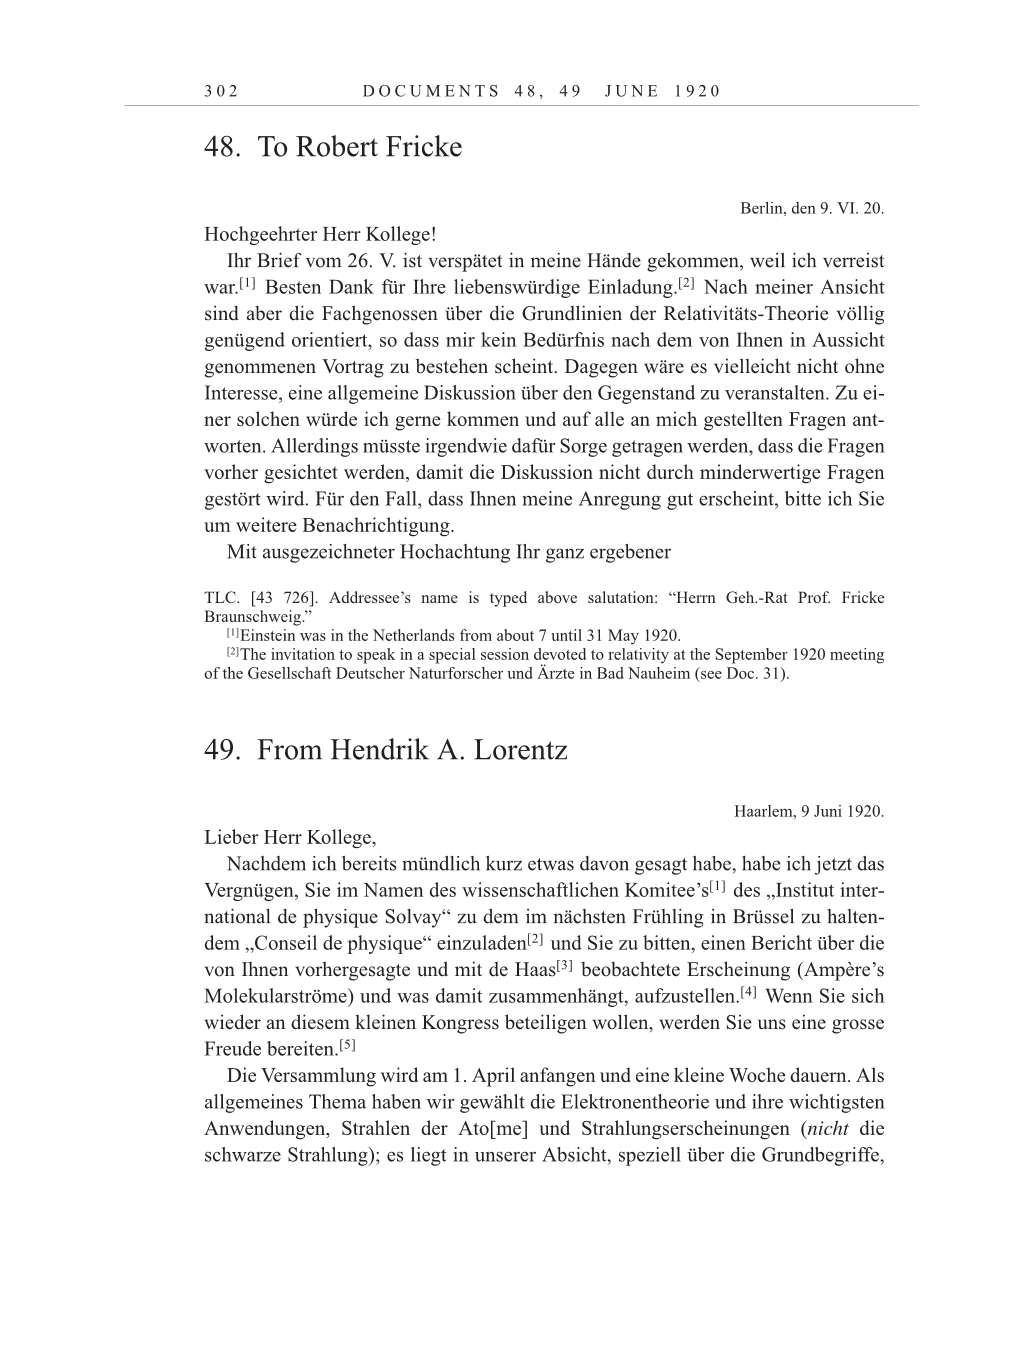 Volume 10: The Berlin Years: Correspondence May-December 1920 / Supplementary Correspondence 1909-1920 page 302